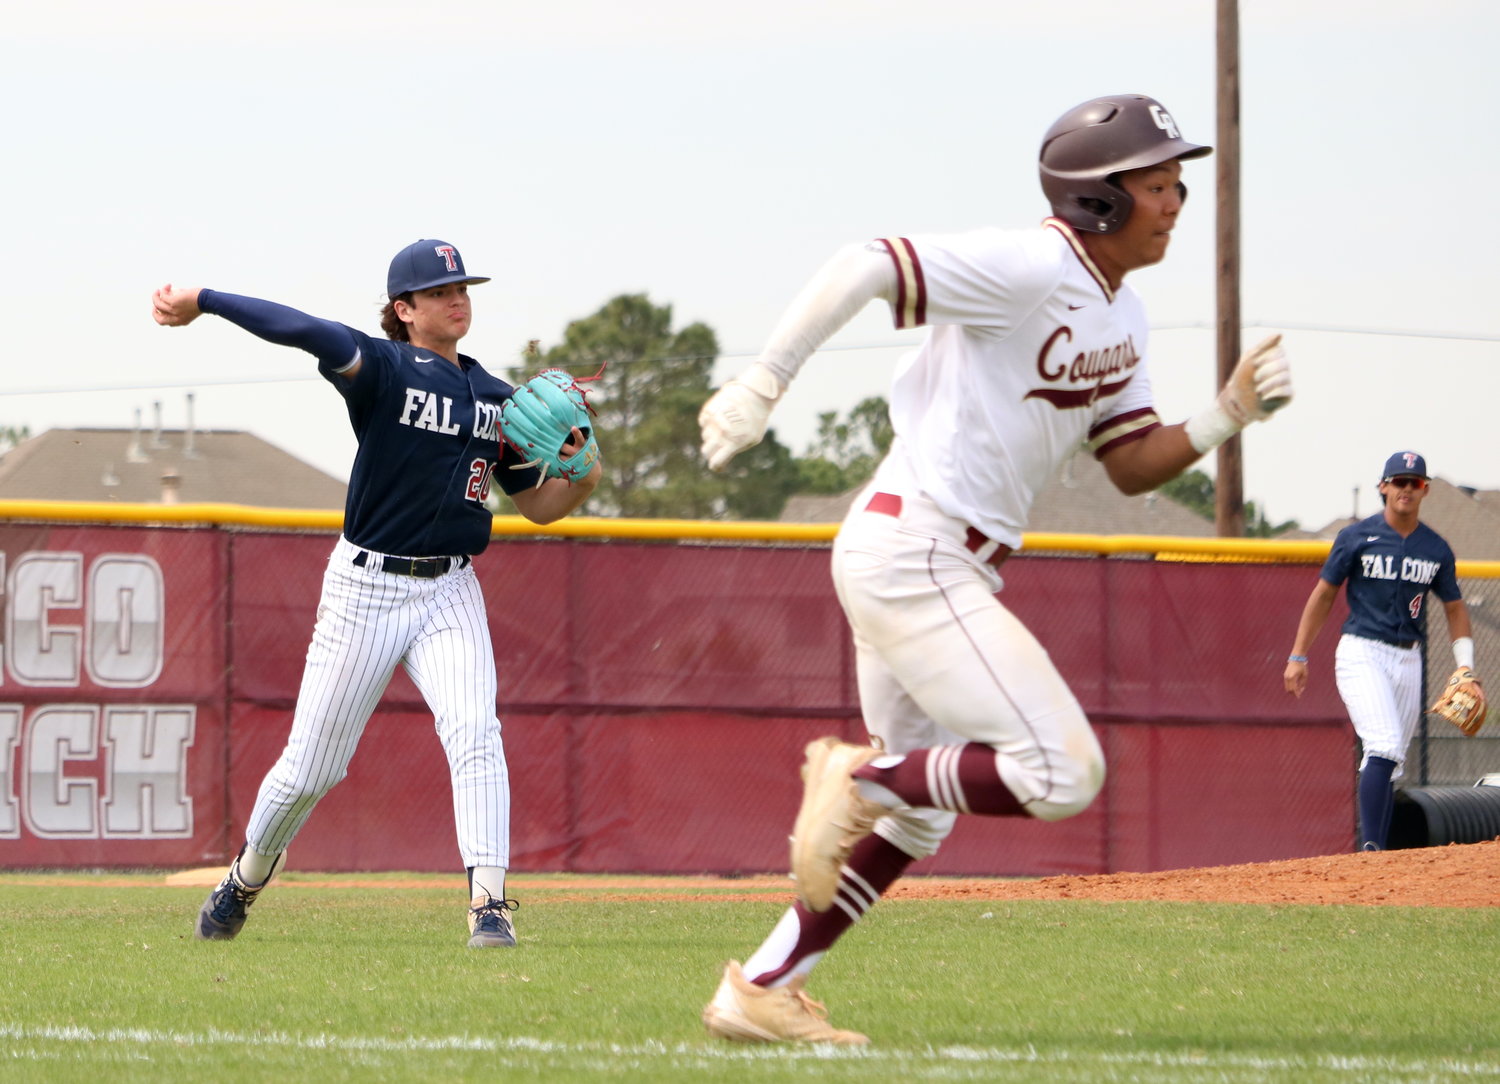 Gavin Brewer throws the ball to first base during Tuesday's game between Tompkins and Cinco Ranch at the Cinco Ranch baseball field.